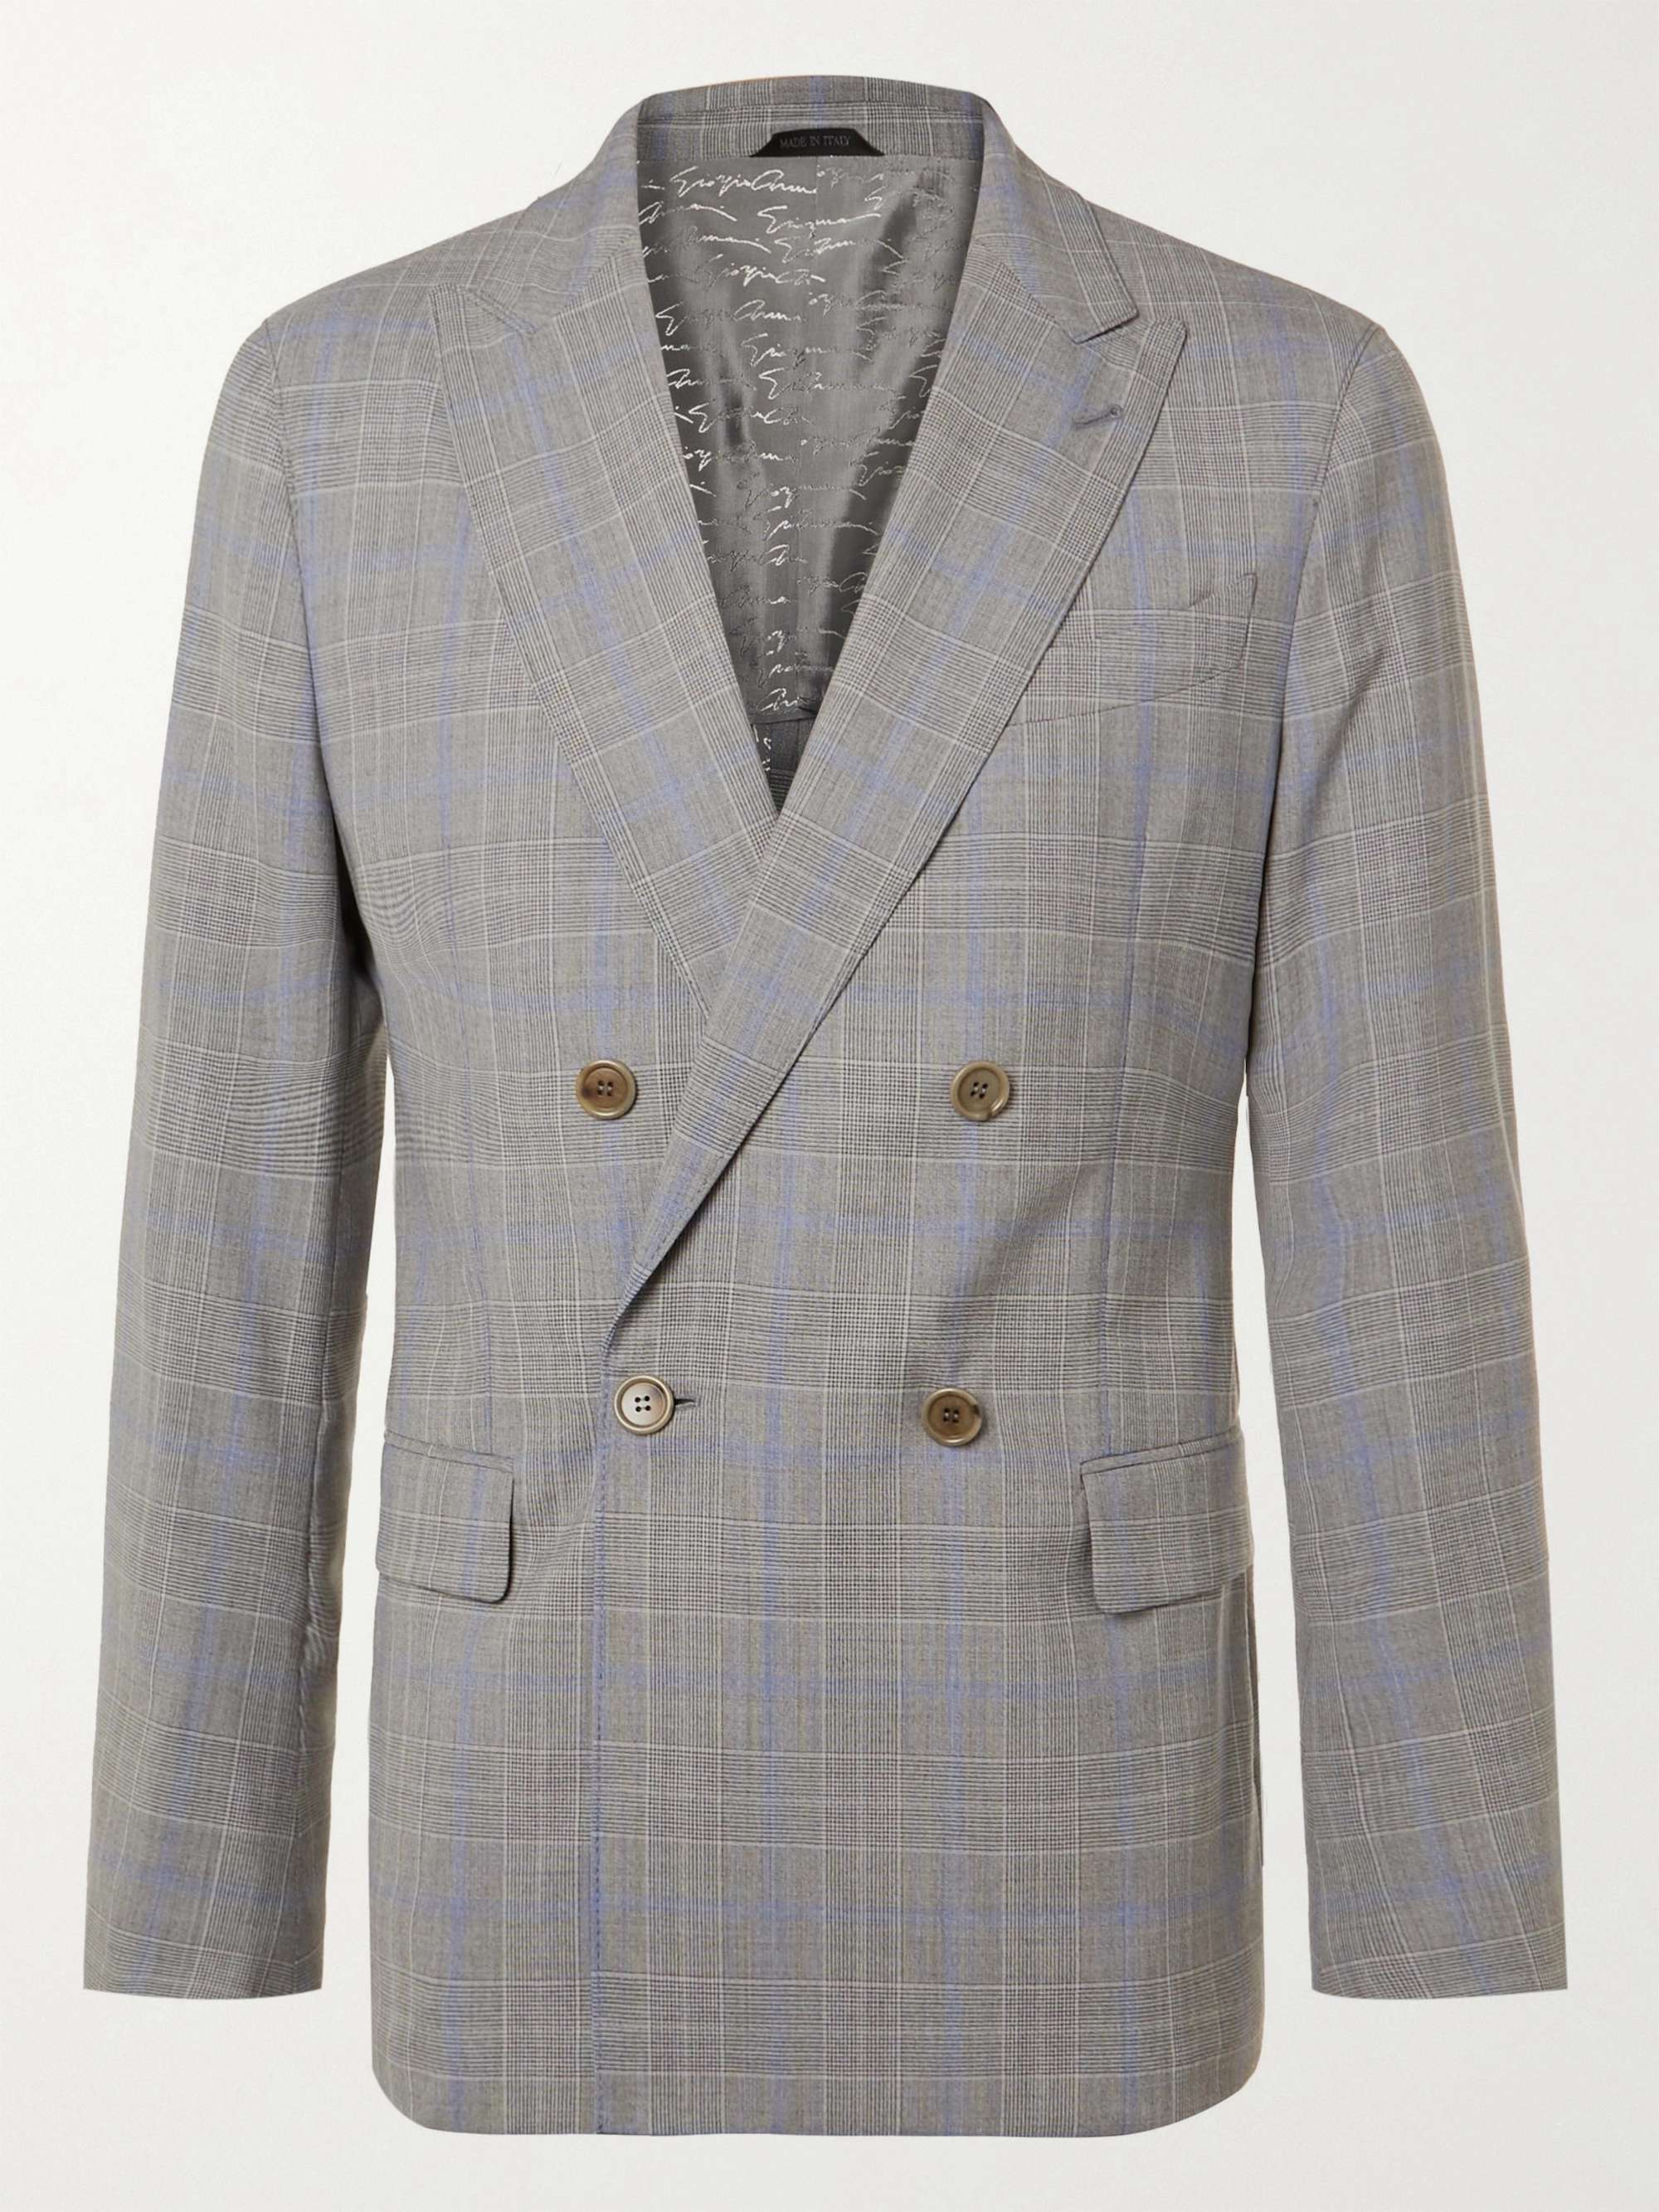 GIORGIO ARMANI Slim-Fit Double-Breasted Prince Of Wales Checked Wool Suit  Jacket | MR PORTER